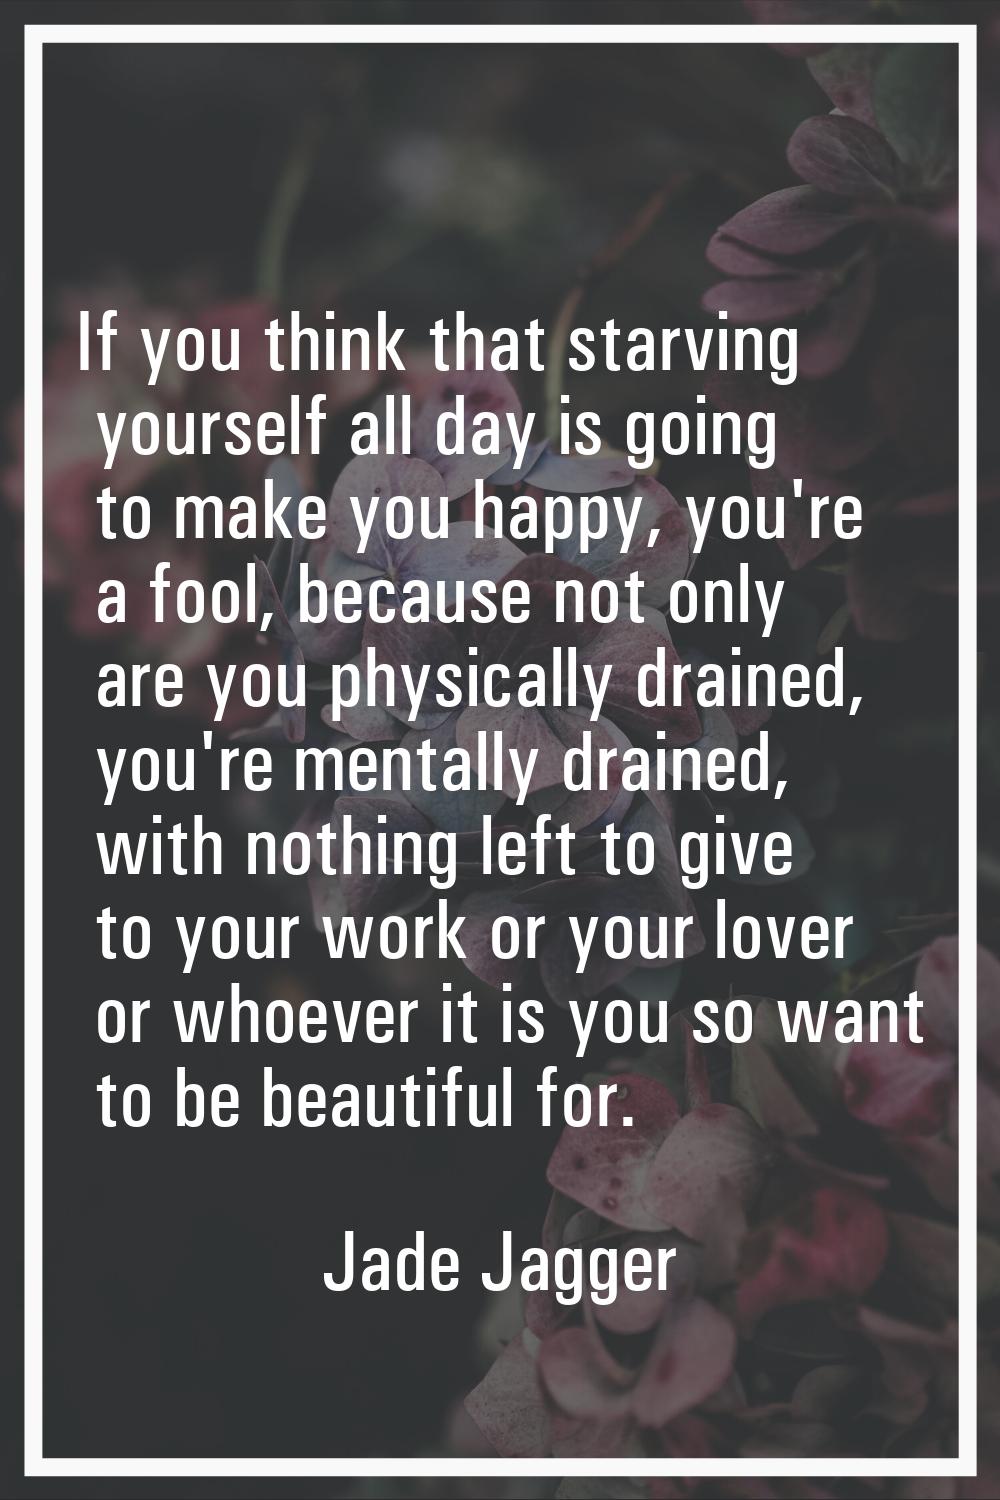 If you think that starving yourself all day is going to make you happy, you're a fool, because not 